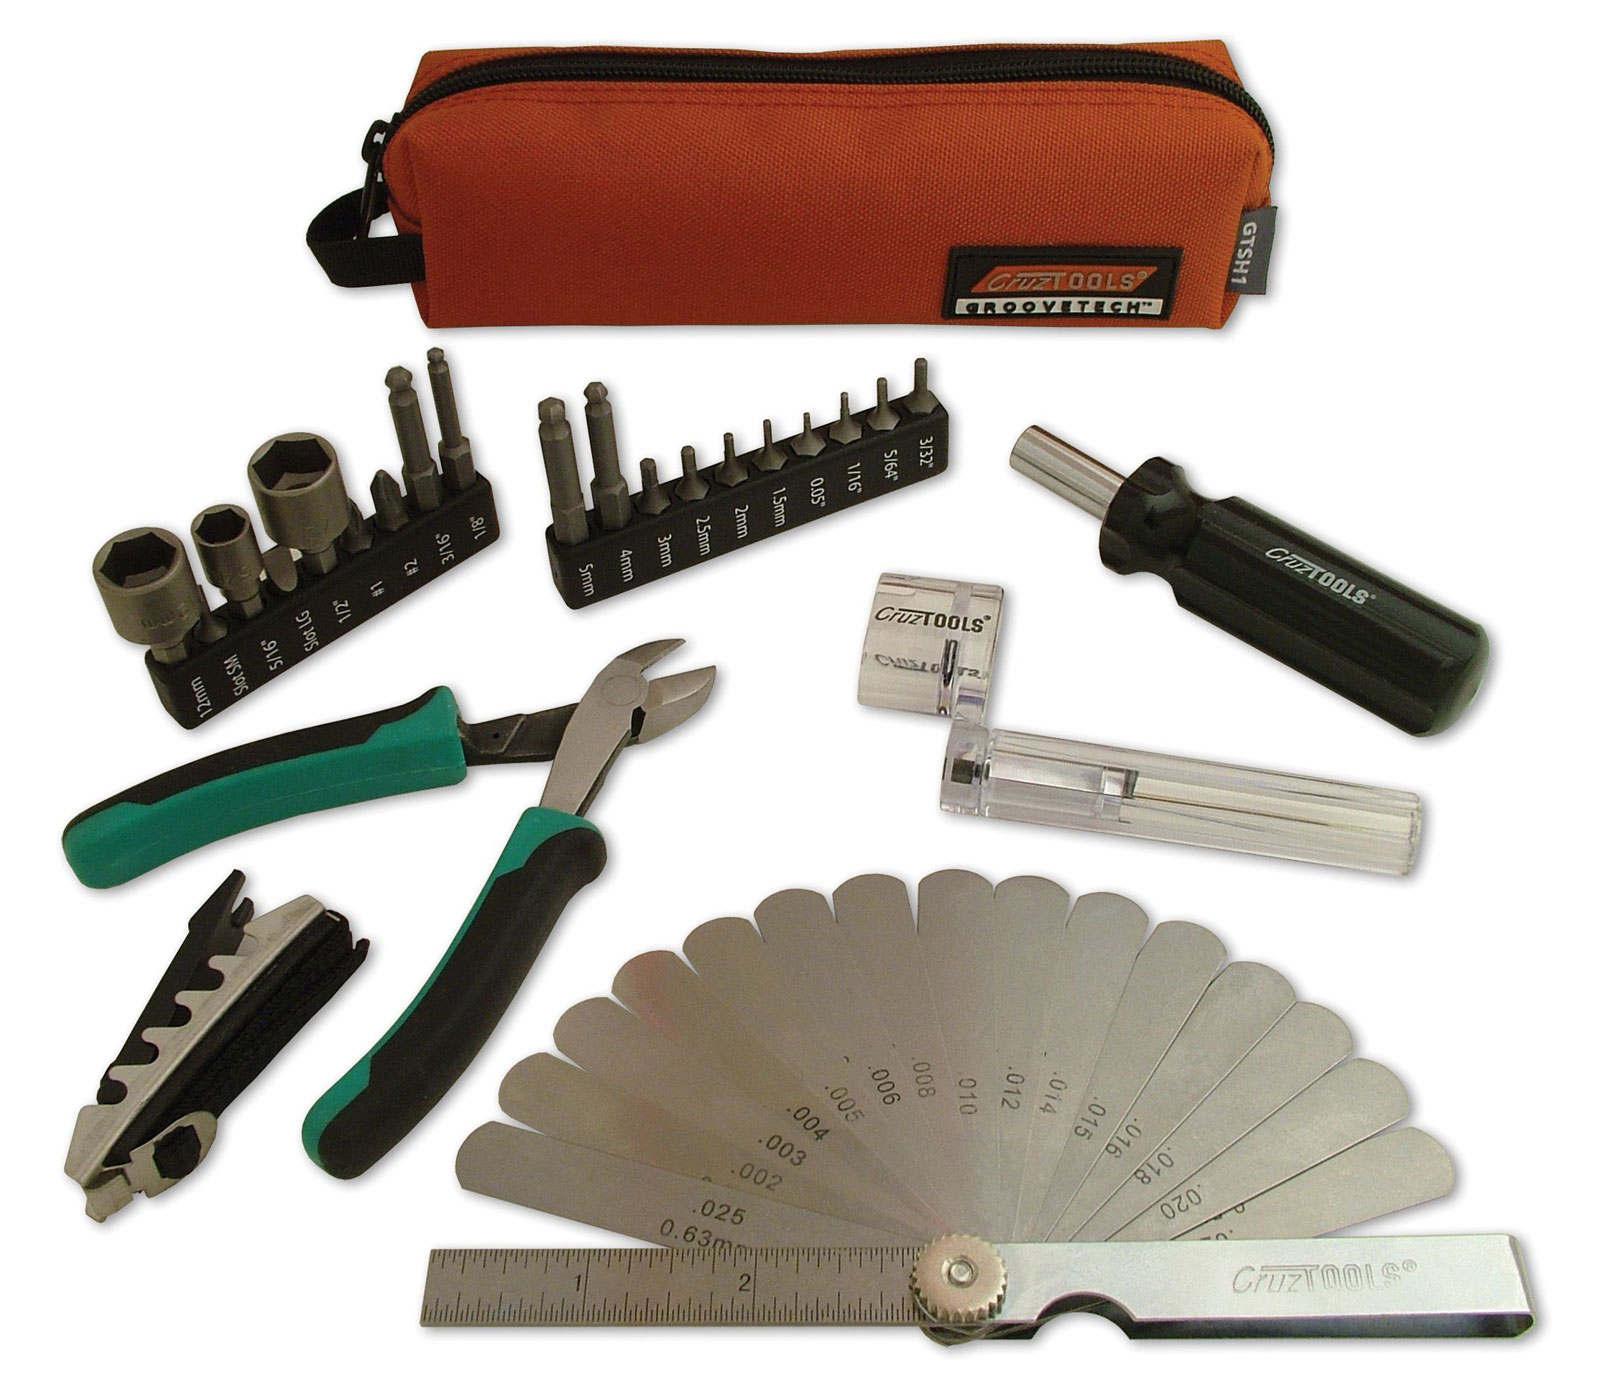 GROOVETECH CRUZ TOOLS STAGEHAND COMPACT TECH KIT TROUSSE COMPACTE MULTI OUTILS